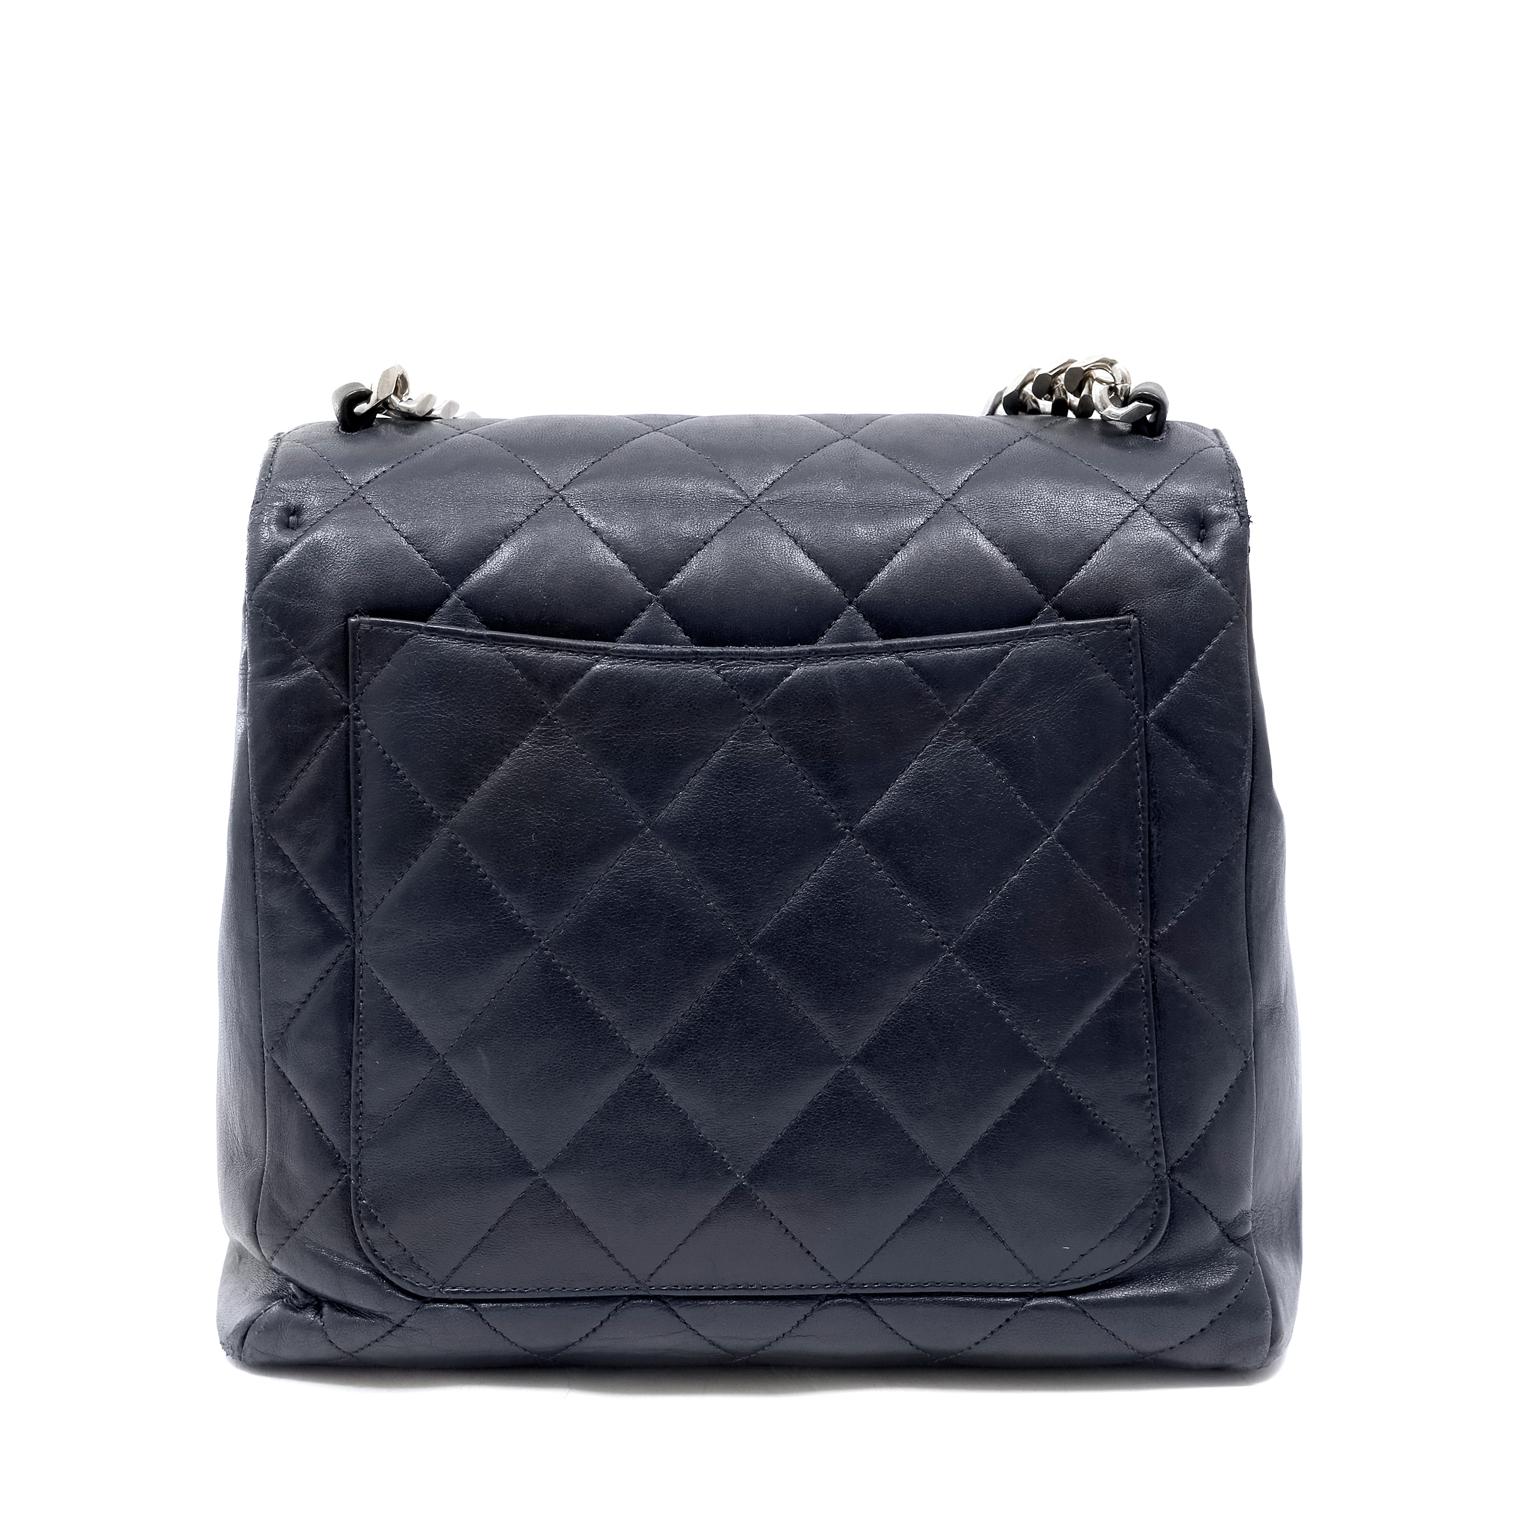 This authentic Chanel Navy Leather Chain Strap Flap Bag is in very good early vintage condition.  A rare find, it is a must have for collectors.
Navy blue leather is quilted in signature Chanel diamond pattern.  Large interlocking CC is stitched on